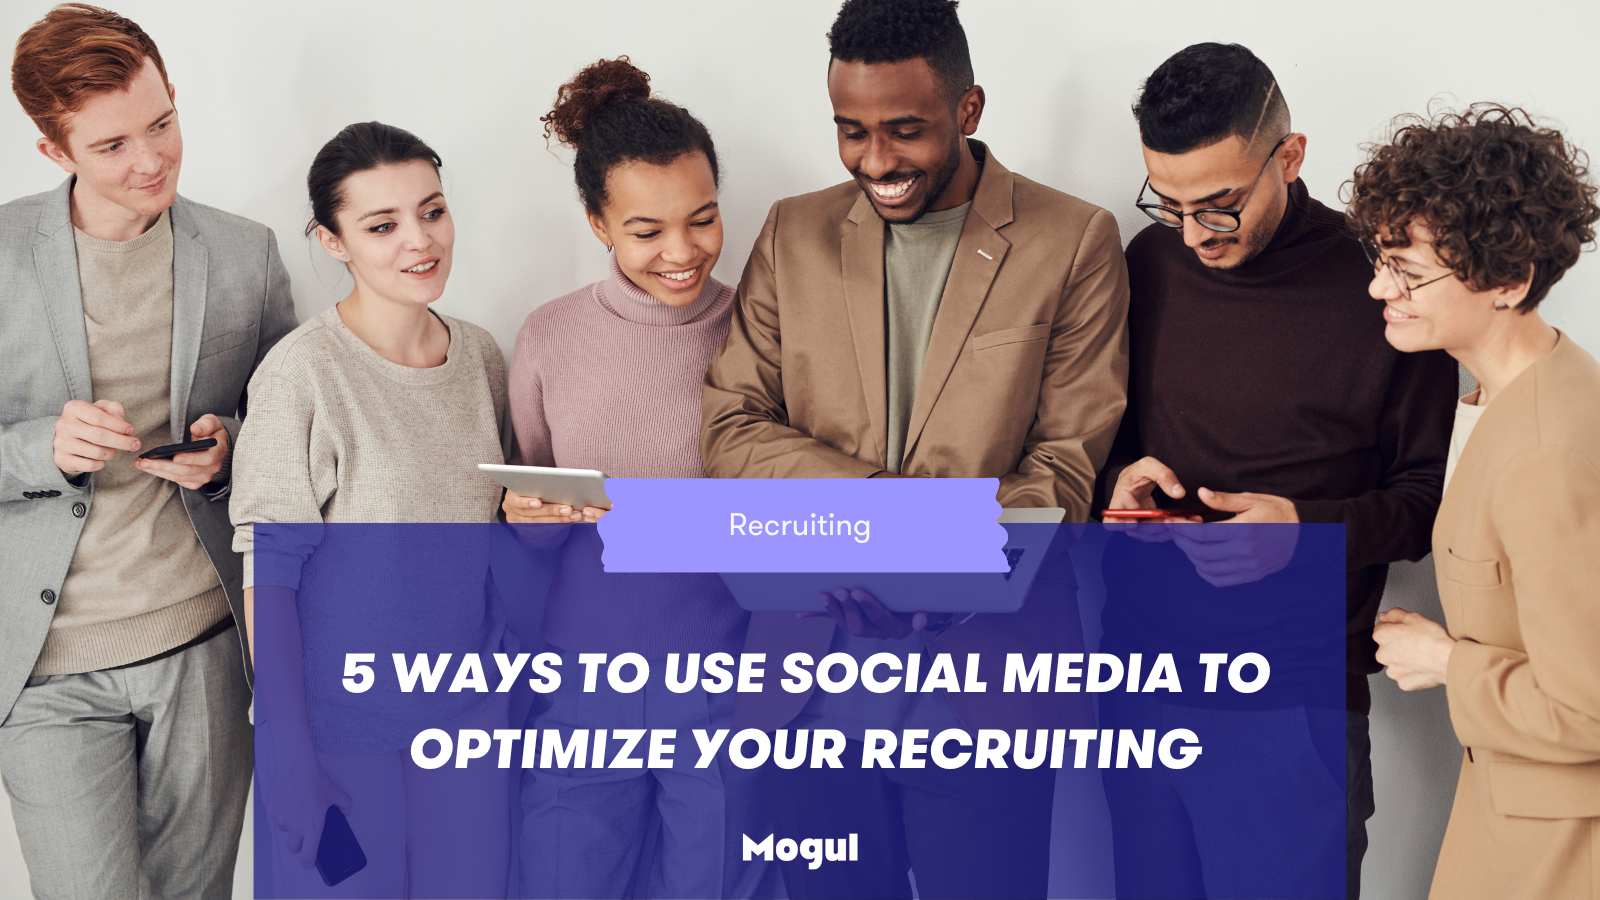 5 Ways to Use Social Media to Optimize Your Recruiting